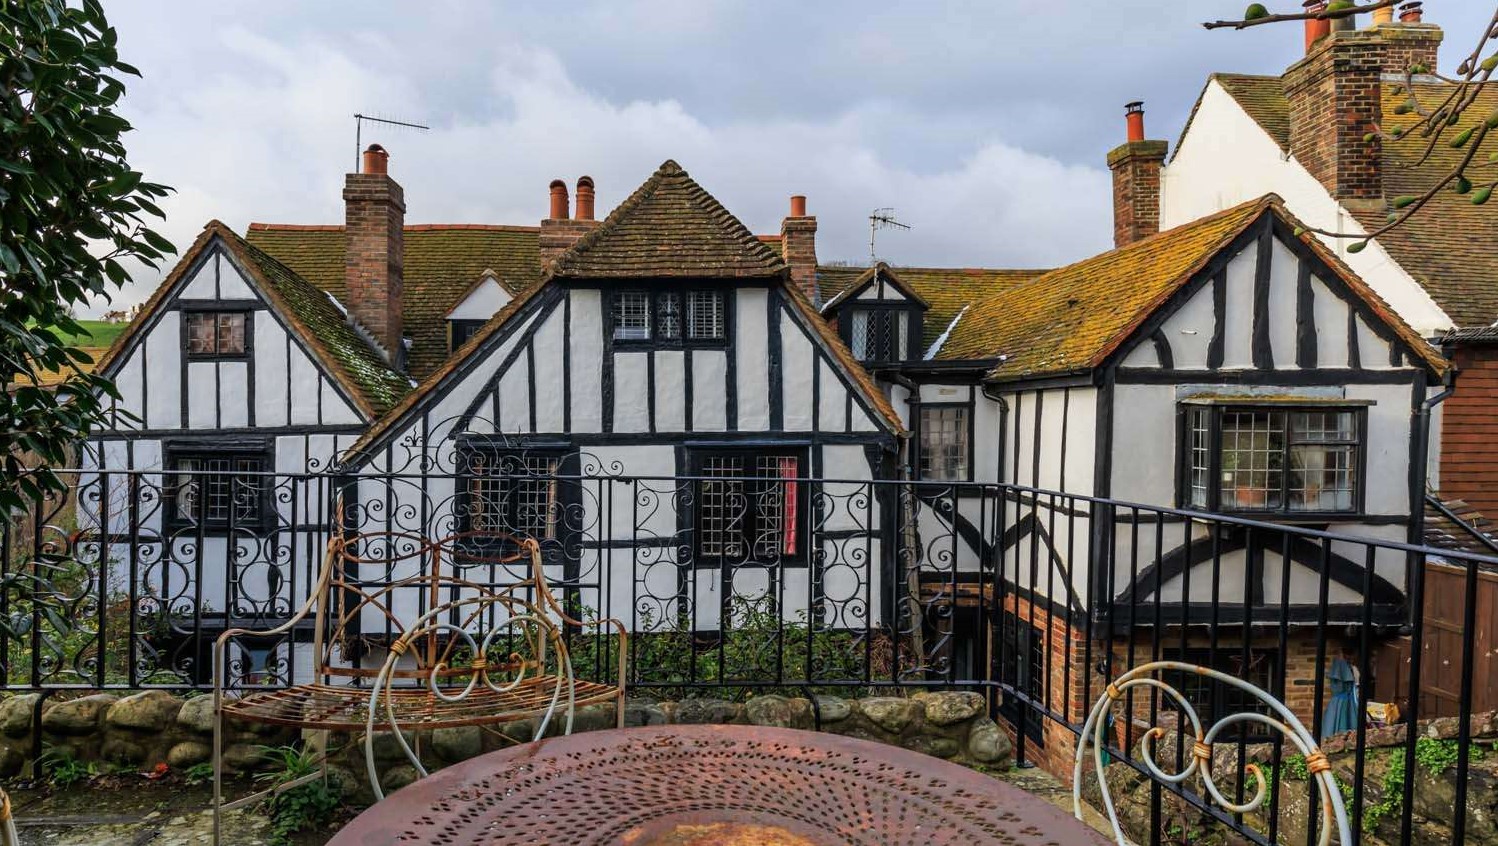 Delve into history with the chance to own Sir Quentin Blake's medieval former home, adorned with character and centuries of stories now available for sale.